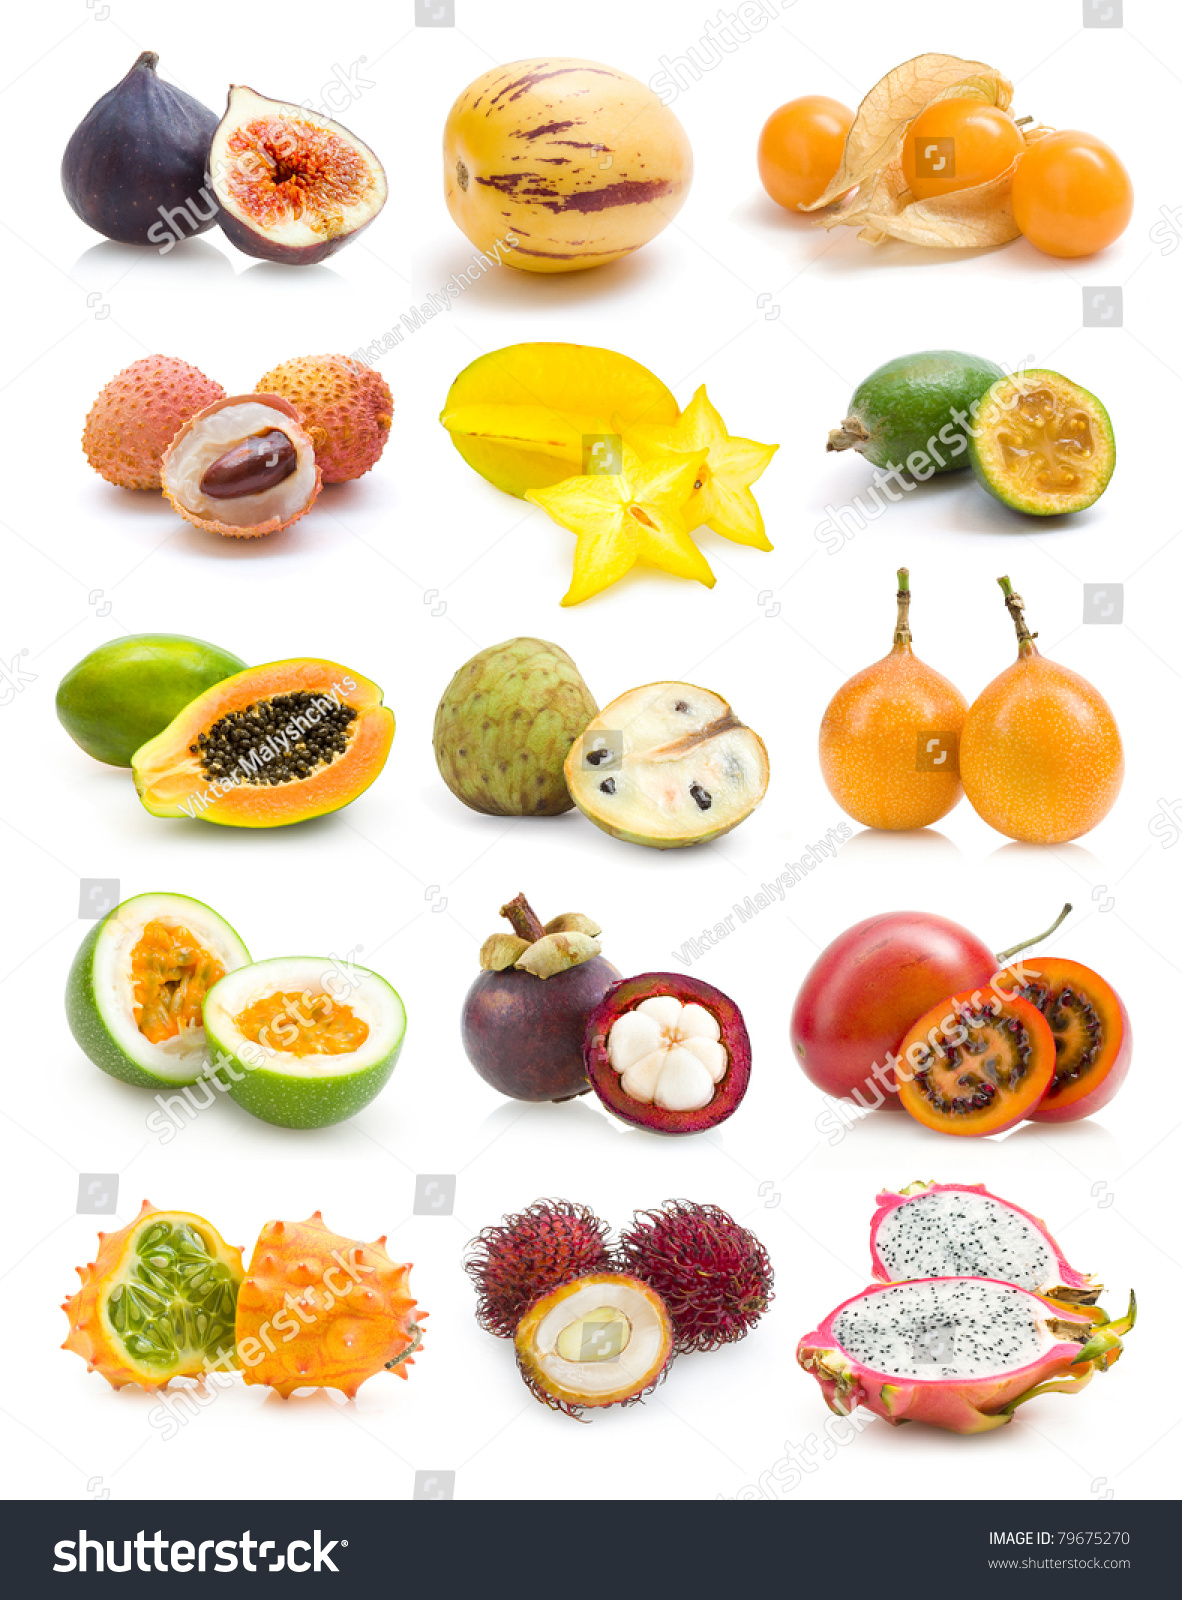 exotic fruit collection stock photo 79675270 - shutterstock